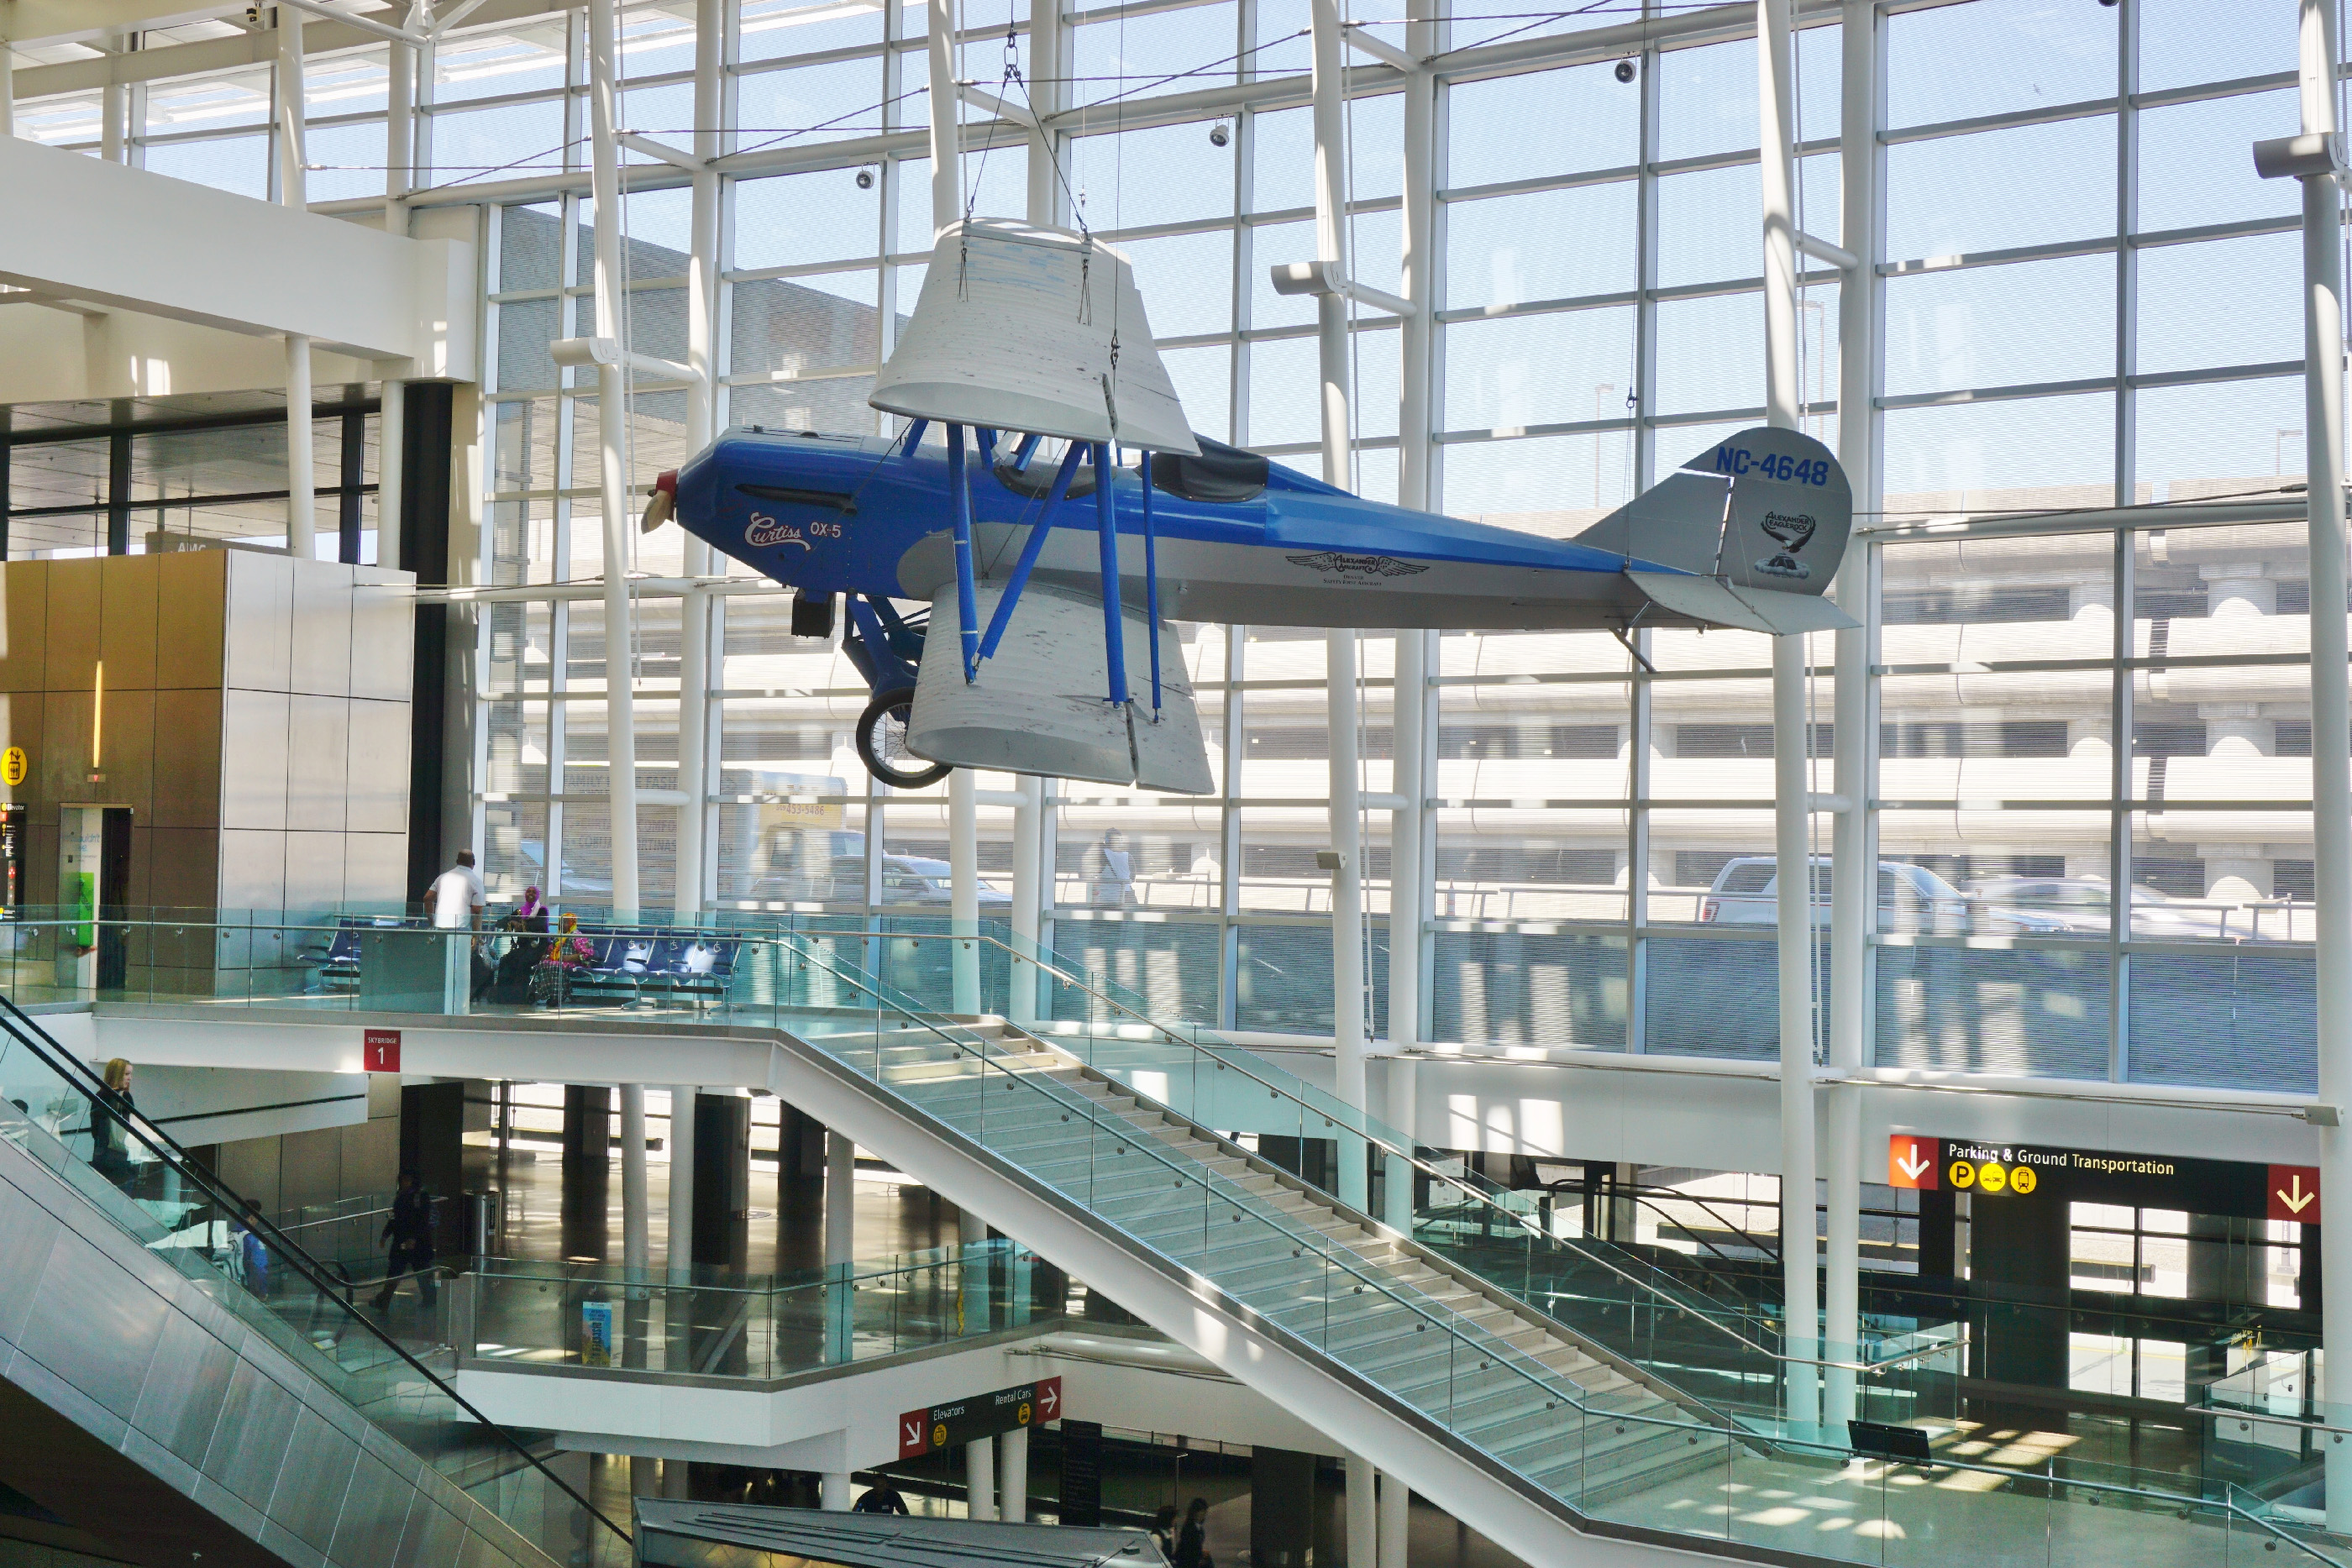 The Sea-Tac Seattle-Tacoma International Airport (SEA) is the largest airport in the Pacific Northwest of the United States. It is a main hub for Alaska Airlines.